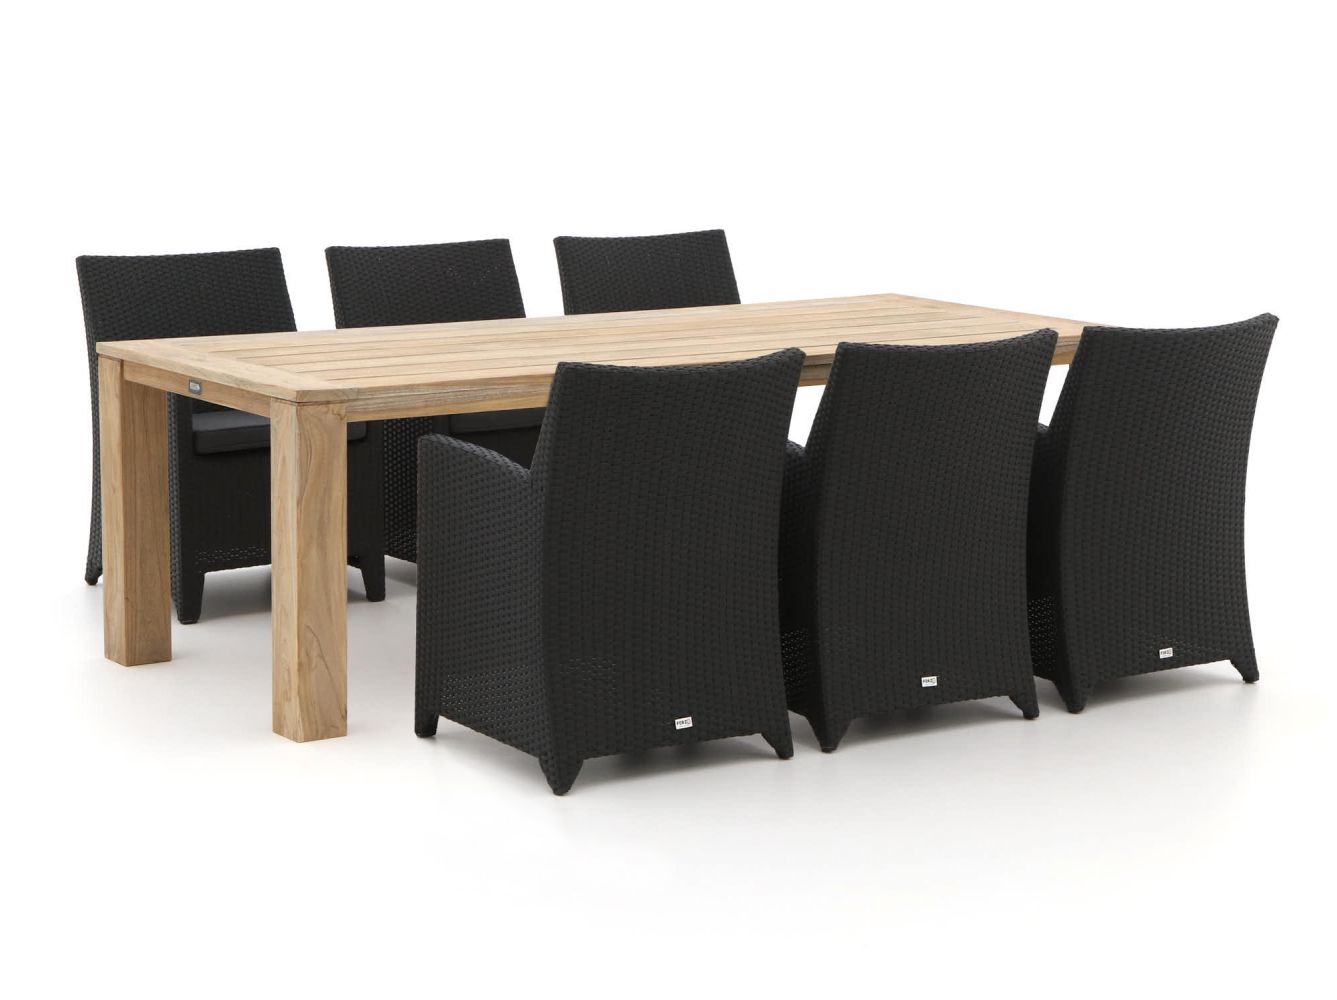 7fc42a50ff875f24f7d9f77685fe8eafa9a350bd 113689 p01 tobbviyxk7xofanc - Forza Barolo/ROUGH-X 240cm dining tuinset 7-delig